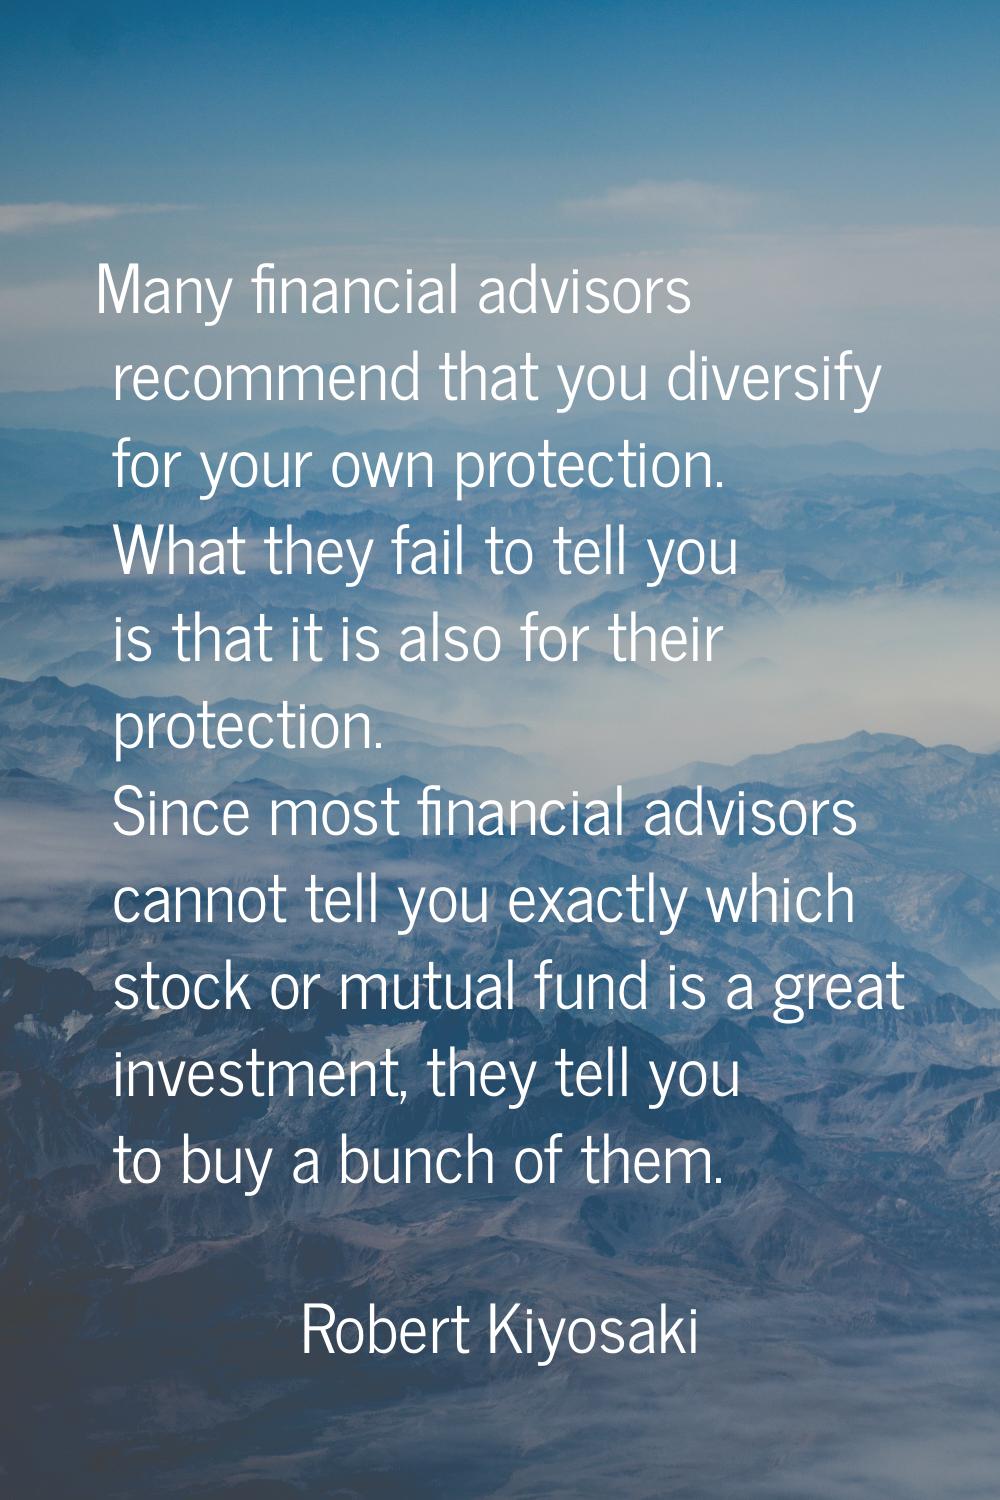 Many financial advisors recommend that you diversify for your own protection. What they fail to tel